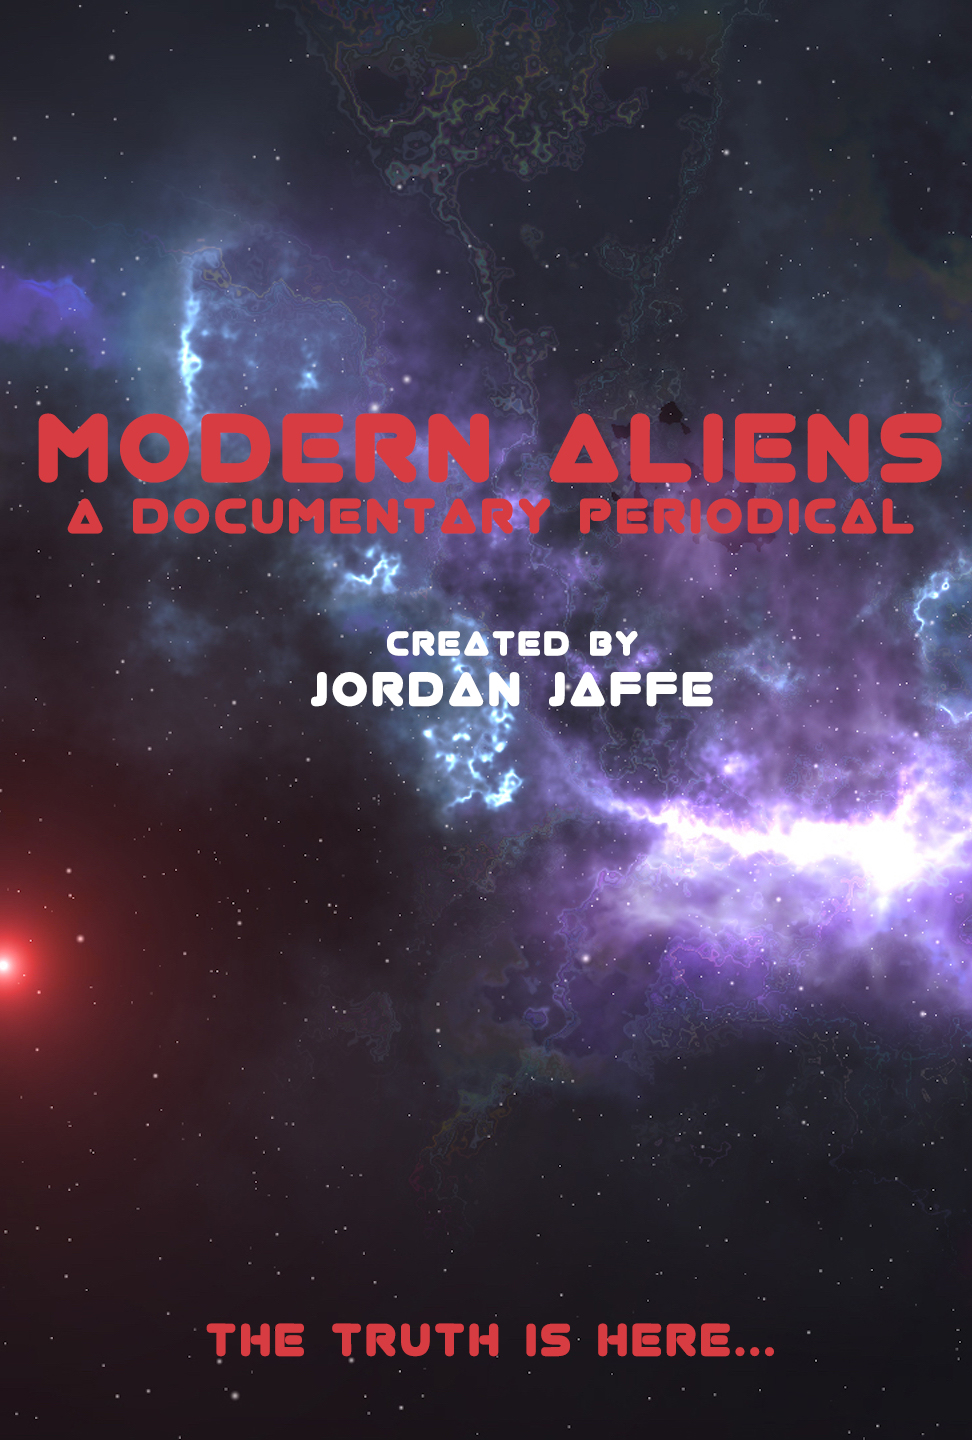 Modern Aliens: A Documentary Periodical